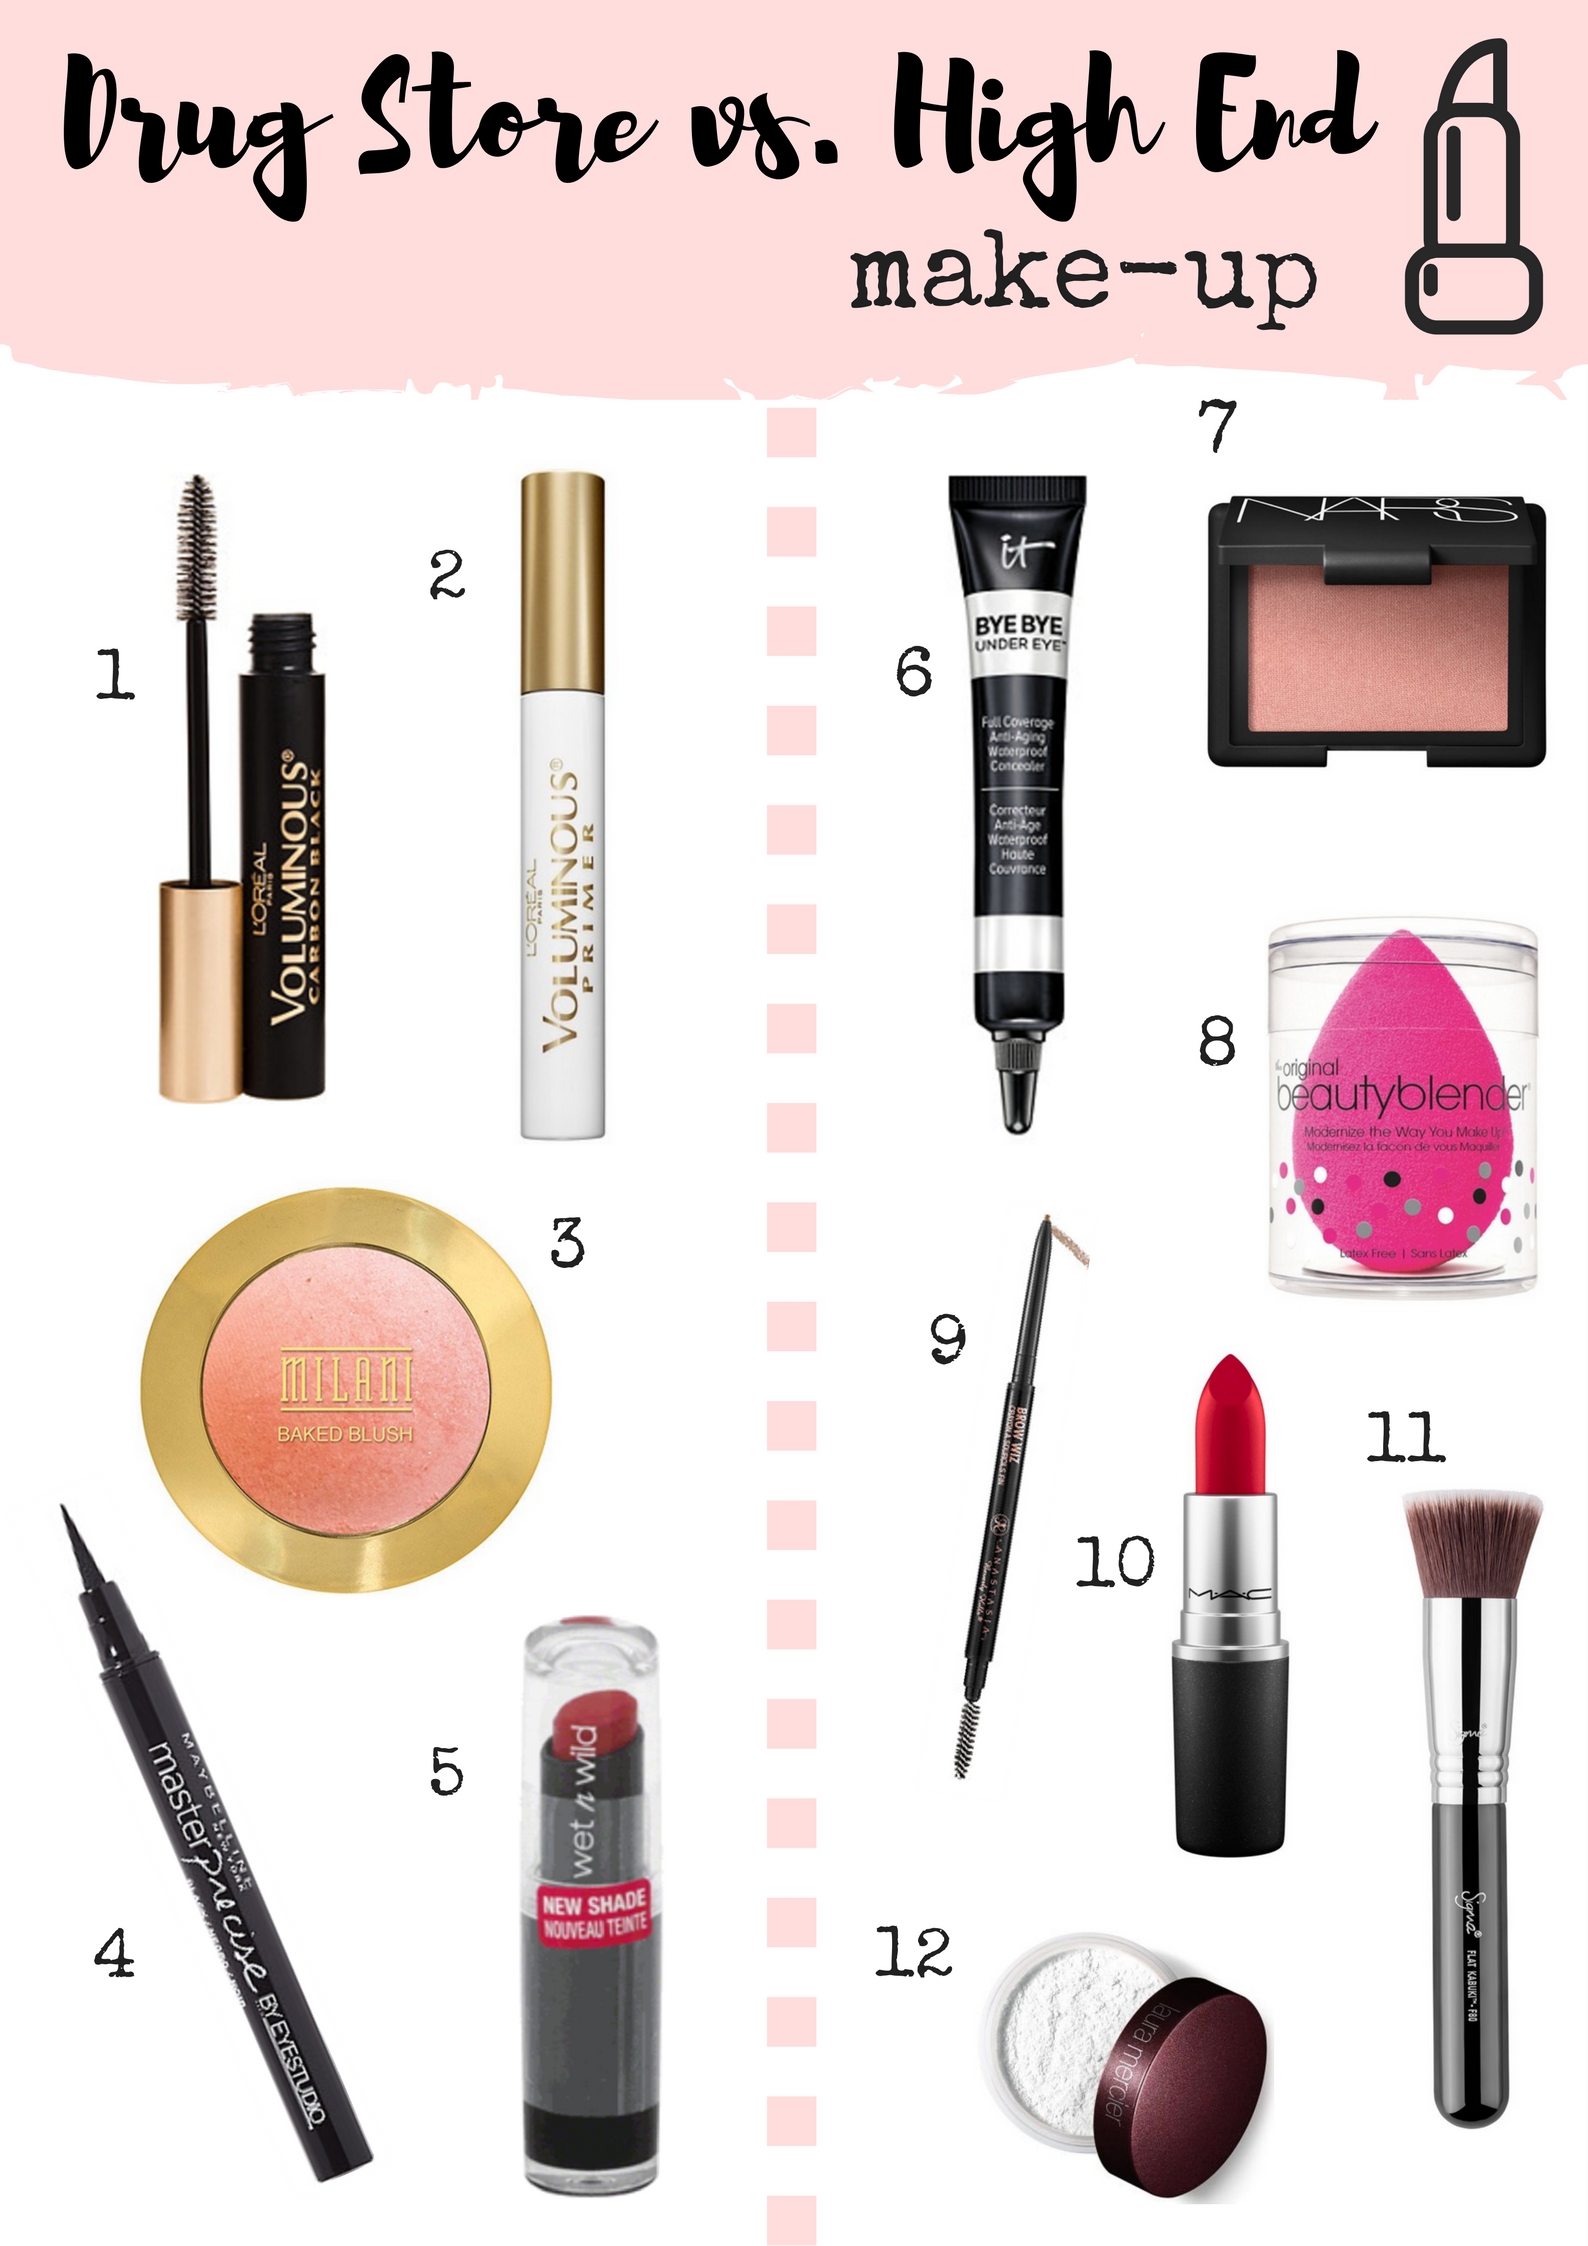 Top 12 Drug Store and High End Make-Up Products - Love 'N' Labels